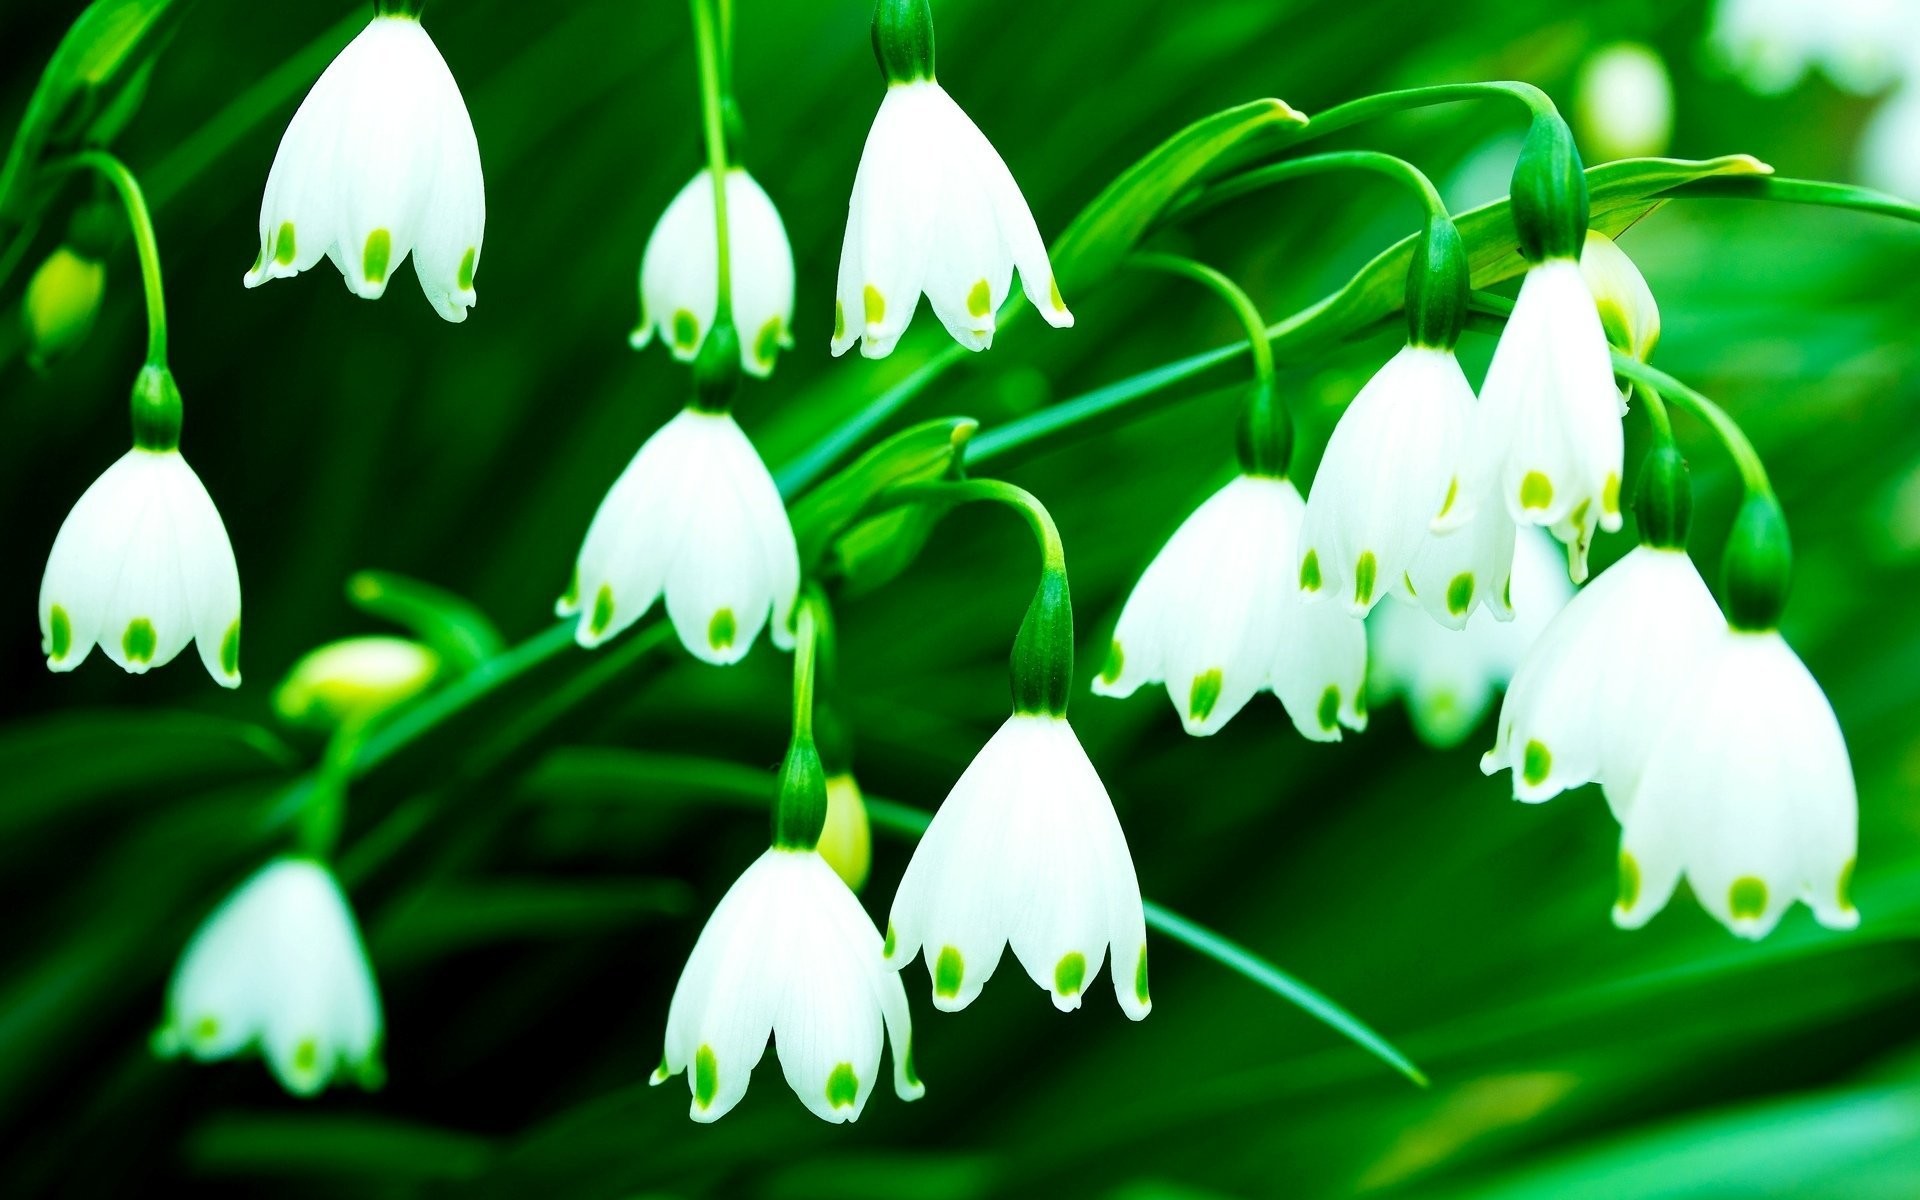 Download Green And White Flower Wallpaper Gallery